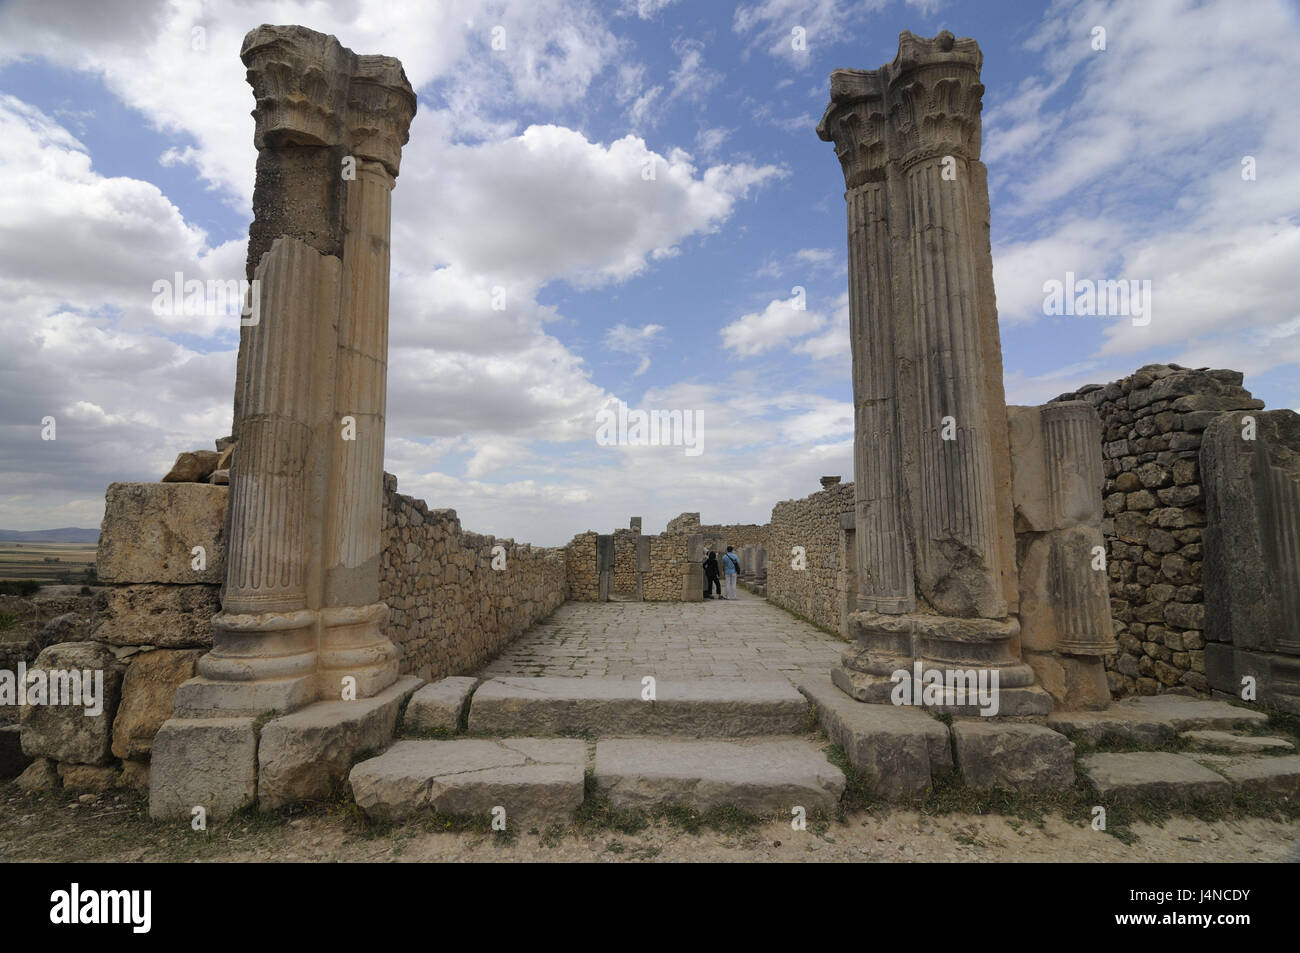 Morocco, Volubilis, ruins, pillars, defensive walls, Africa, North Africa, ruin site, place of interest, travel, culture, story, ruin, building, structure, remains, architecture, transitoriness, historically, Roman, excavation site, UNESCO-world cultural heritage, tourism, Stock Photo